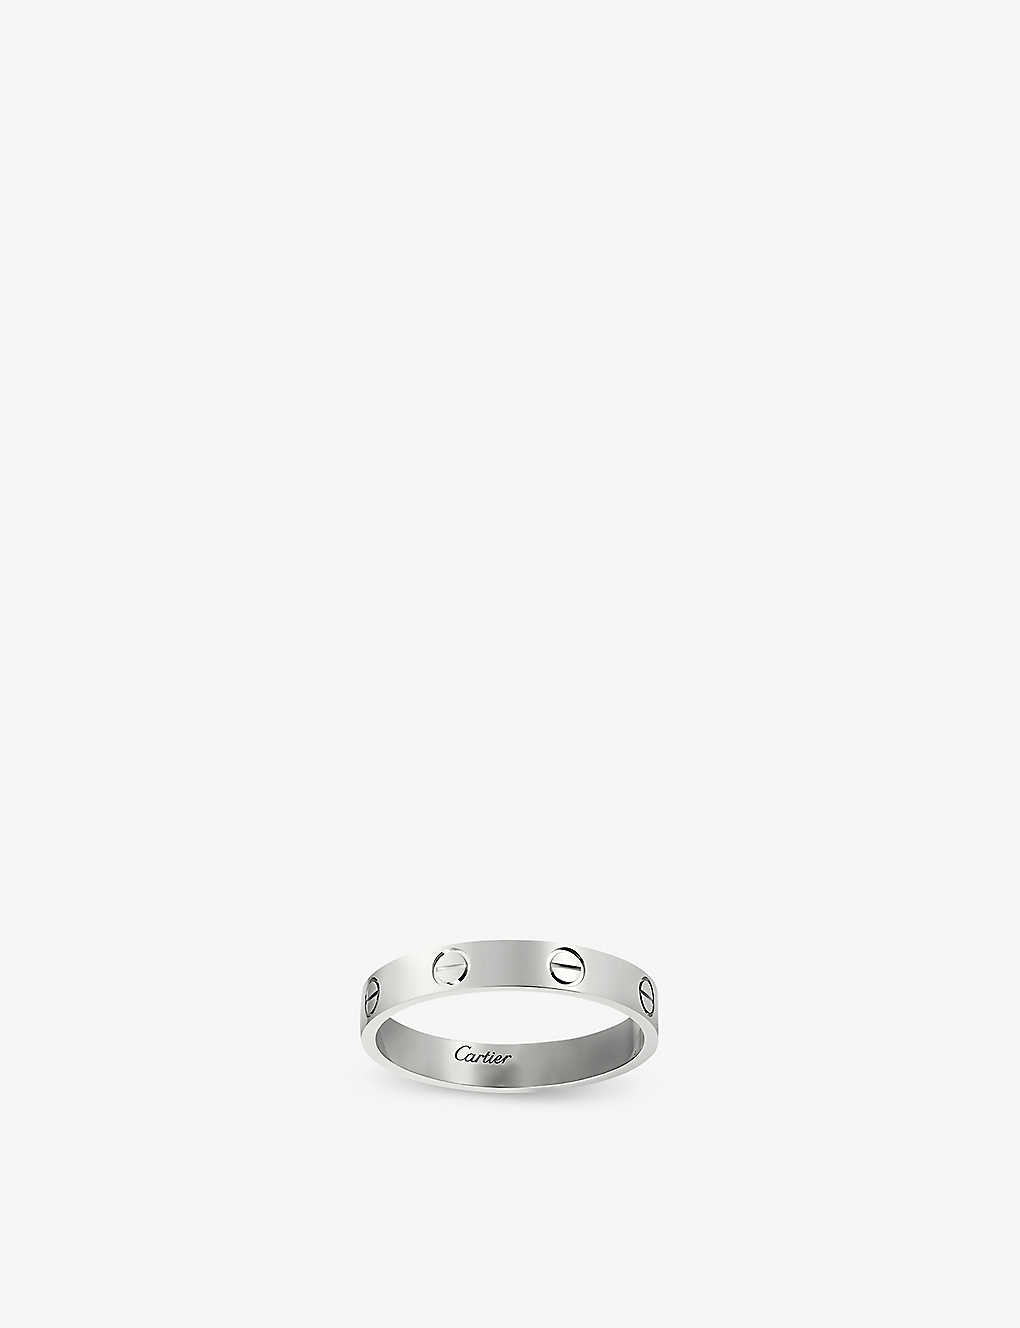 Can you shower with Cartier love ring?